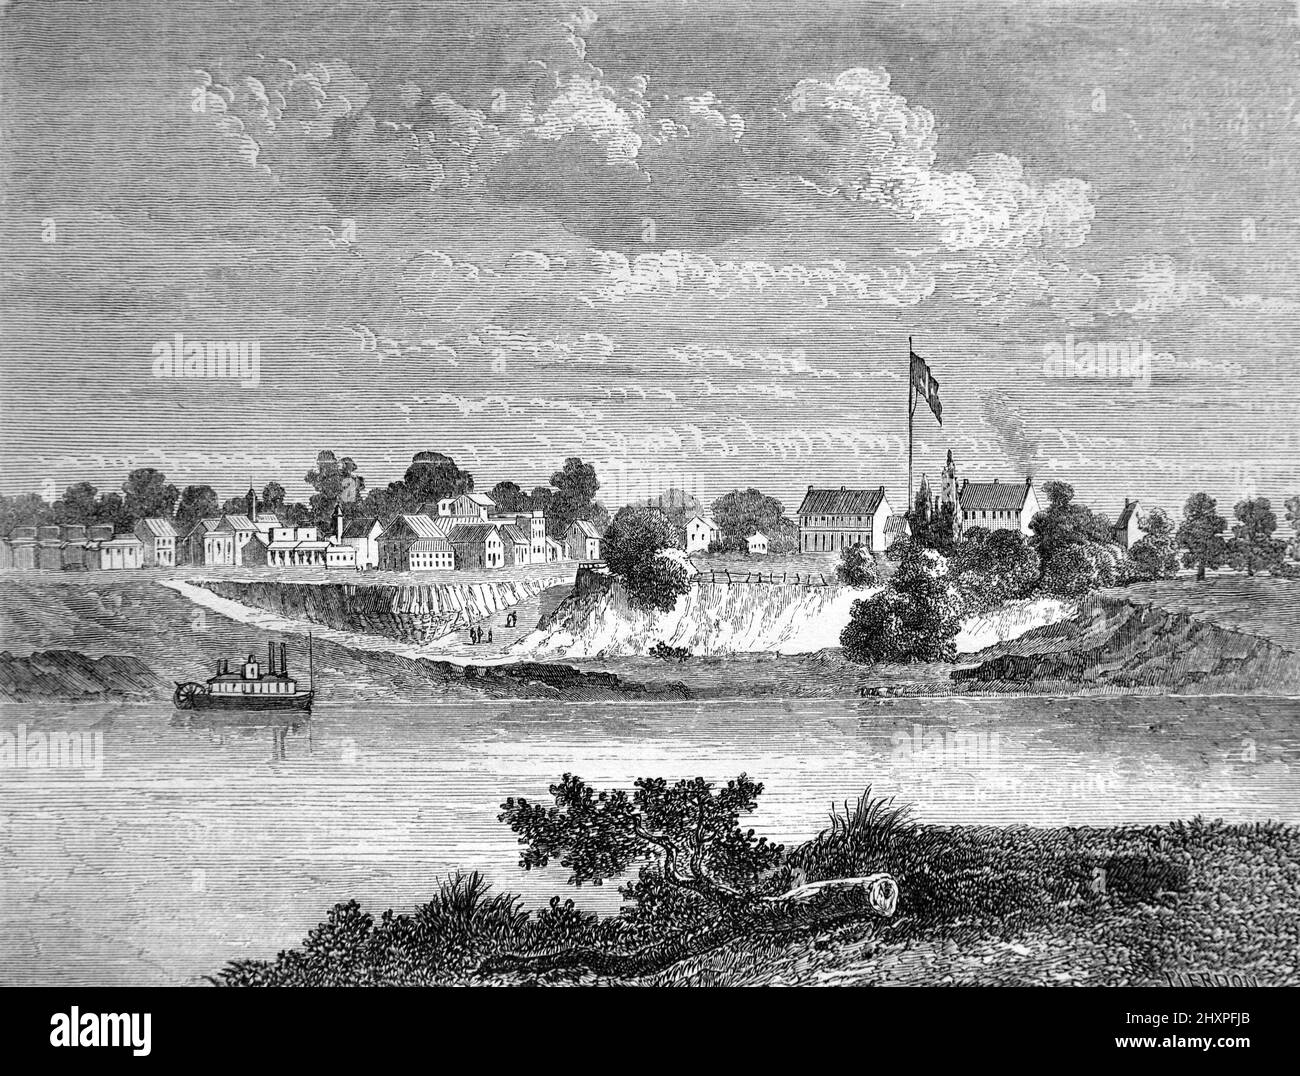 Fort Worth, formerly a frontier military post, founded in 1817, at the junction of the Arkansas and Poteau Rivers, Arkansas. US, USA or United States of America. Vintage Illustration or Engraving 1860. Stock Photo